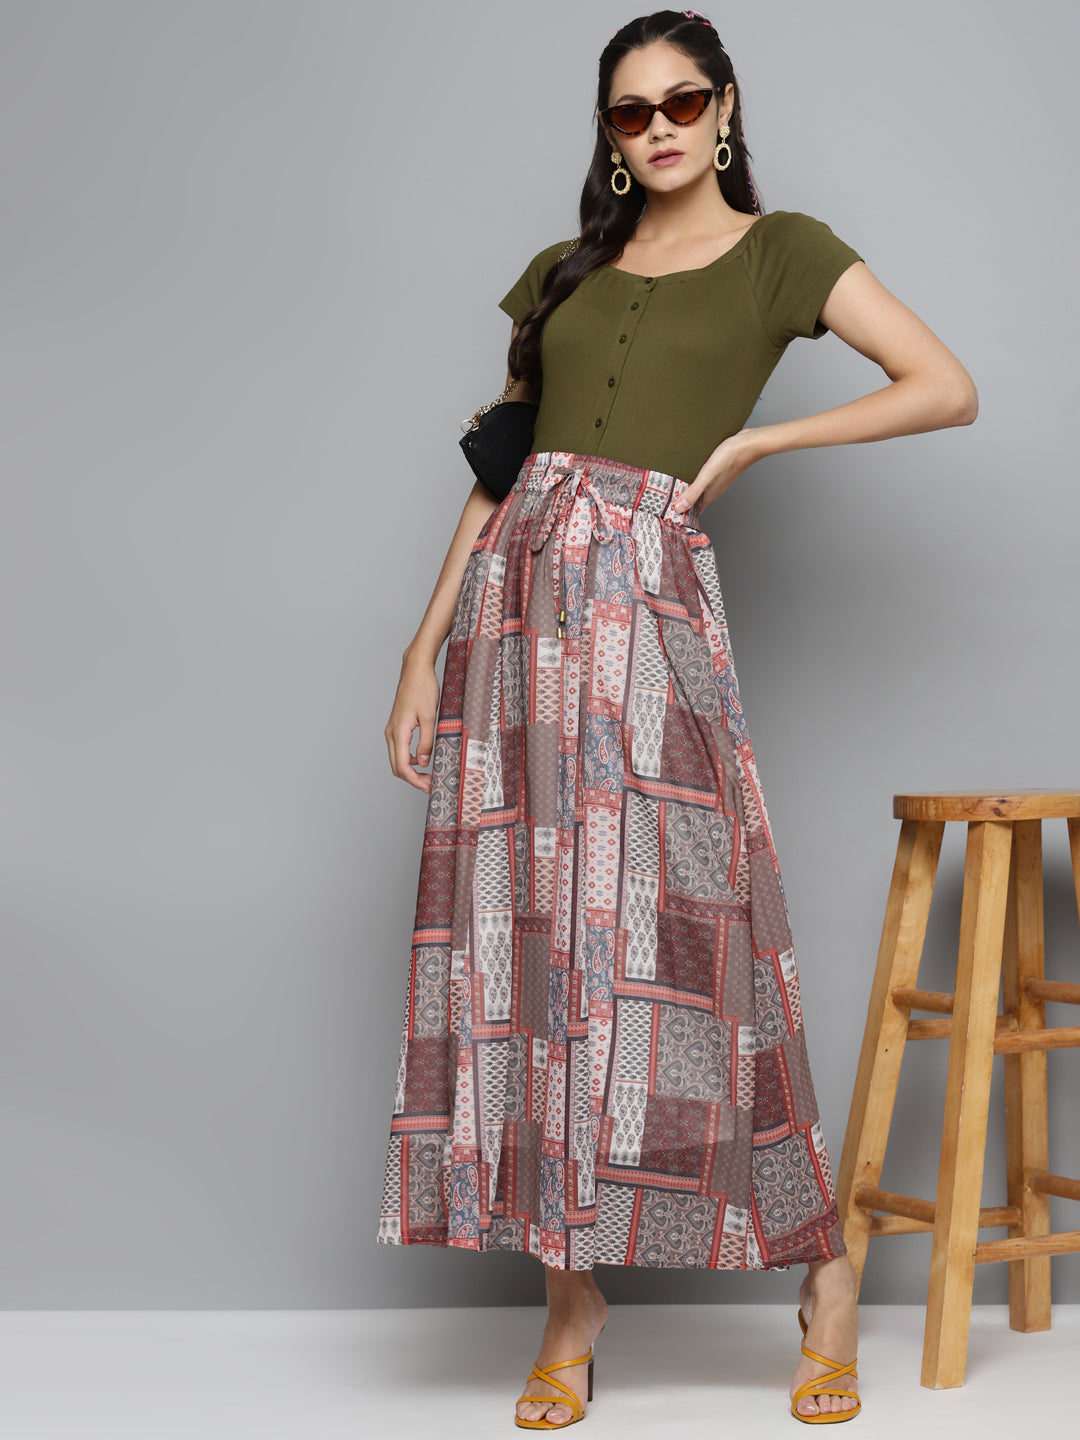 Brown Patch Print Flared Maxi Skirt